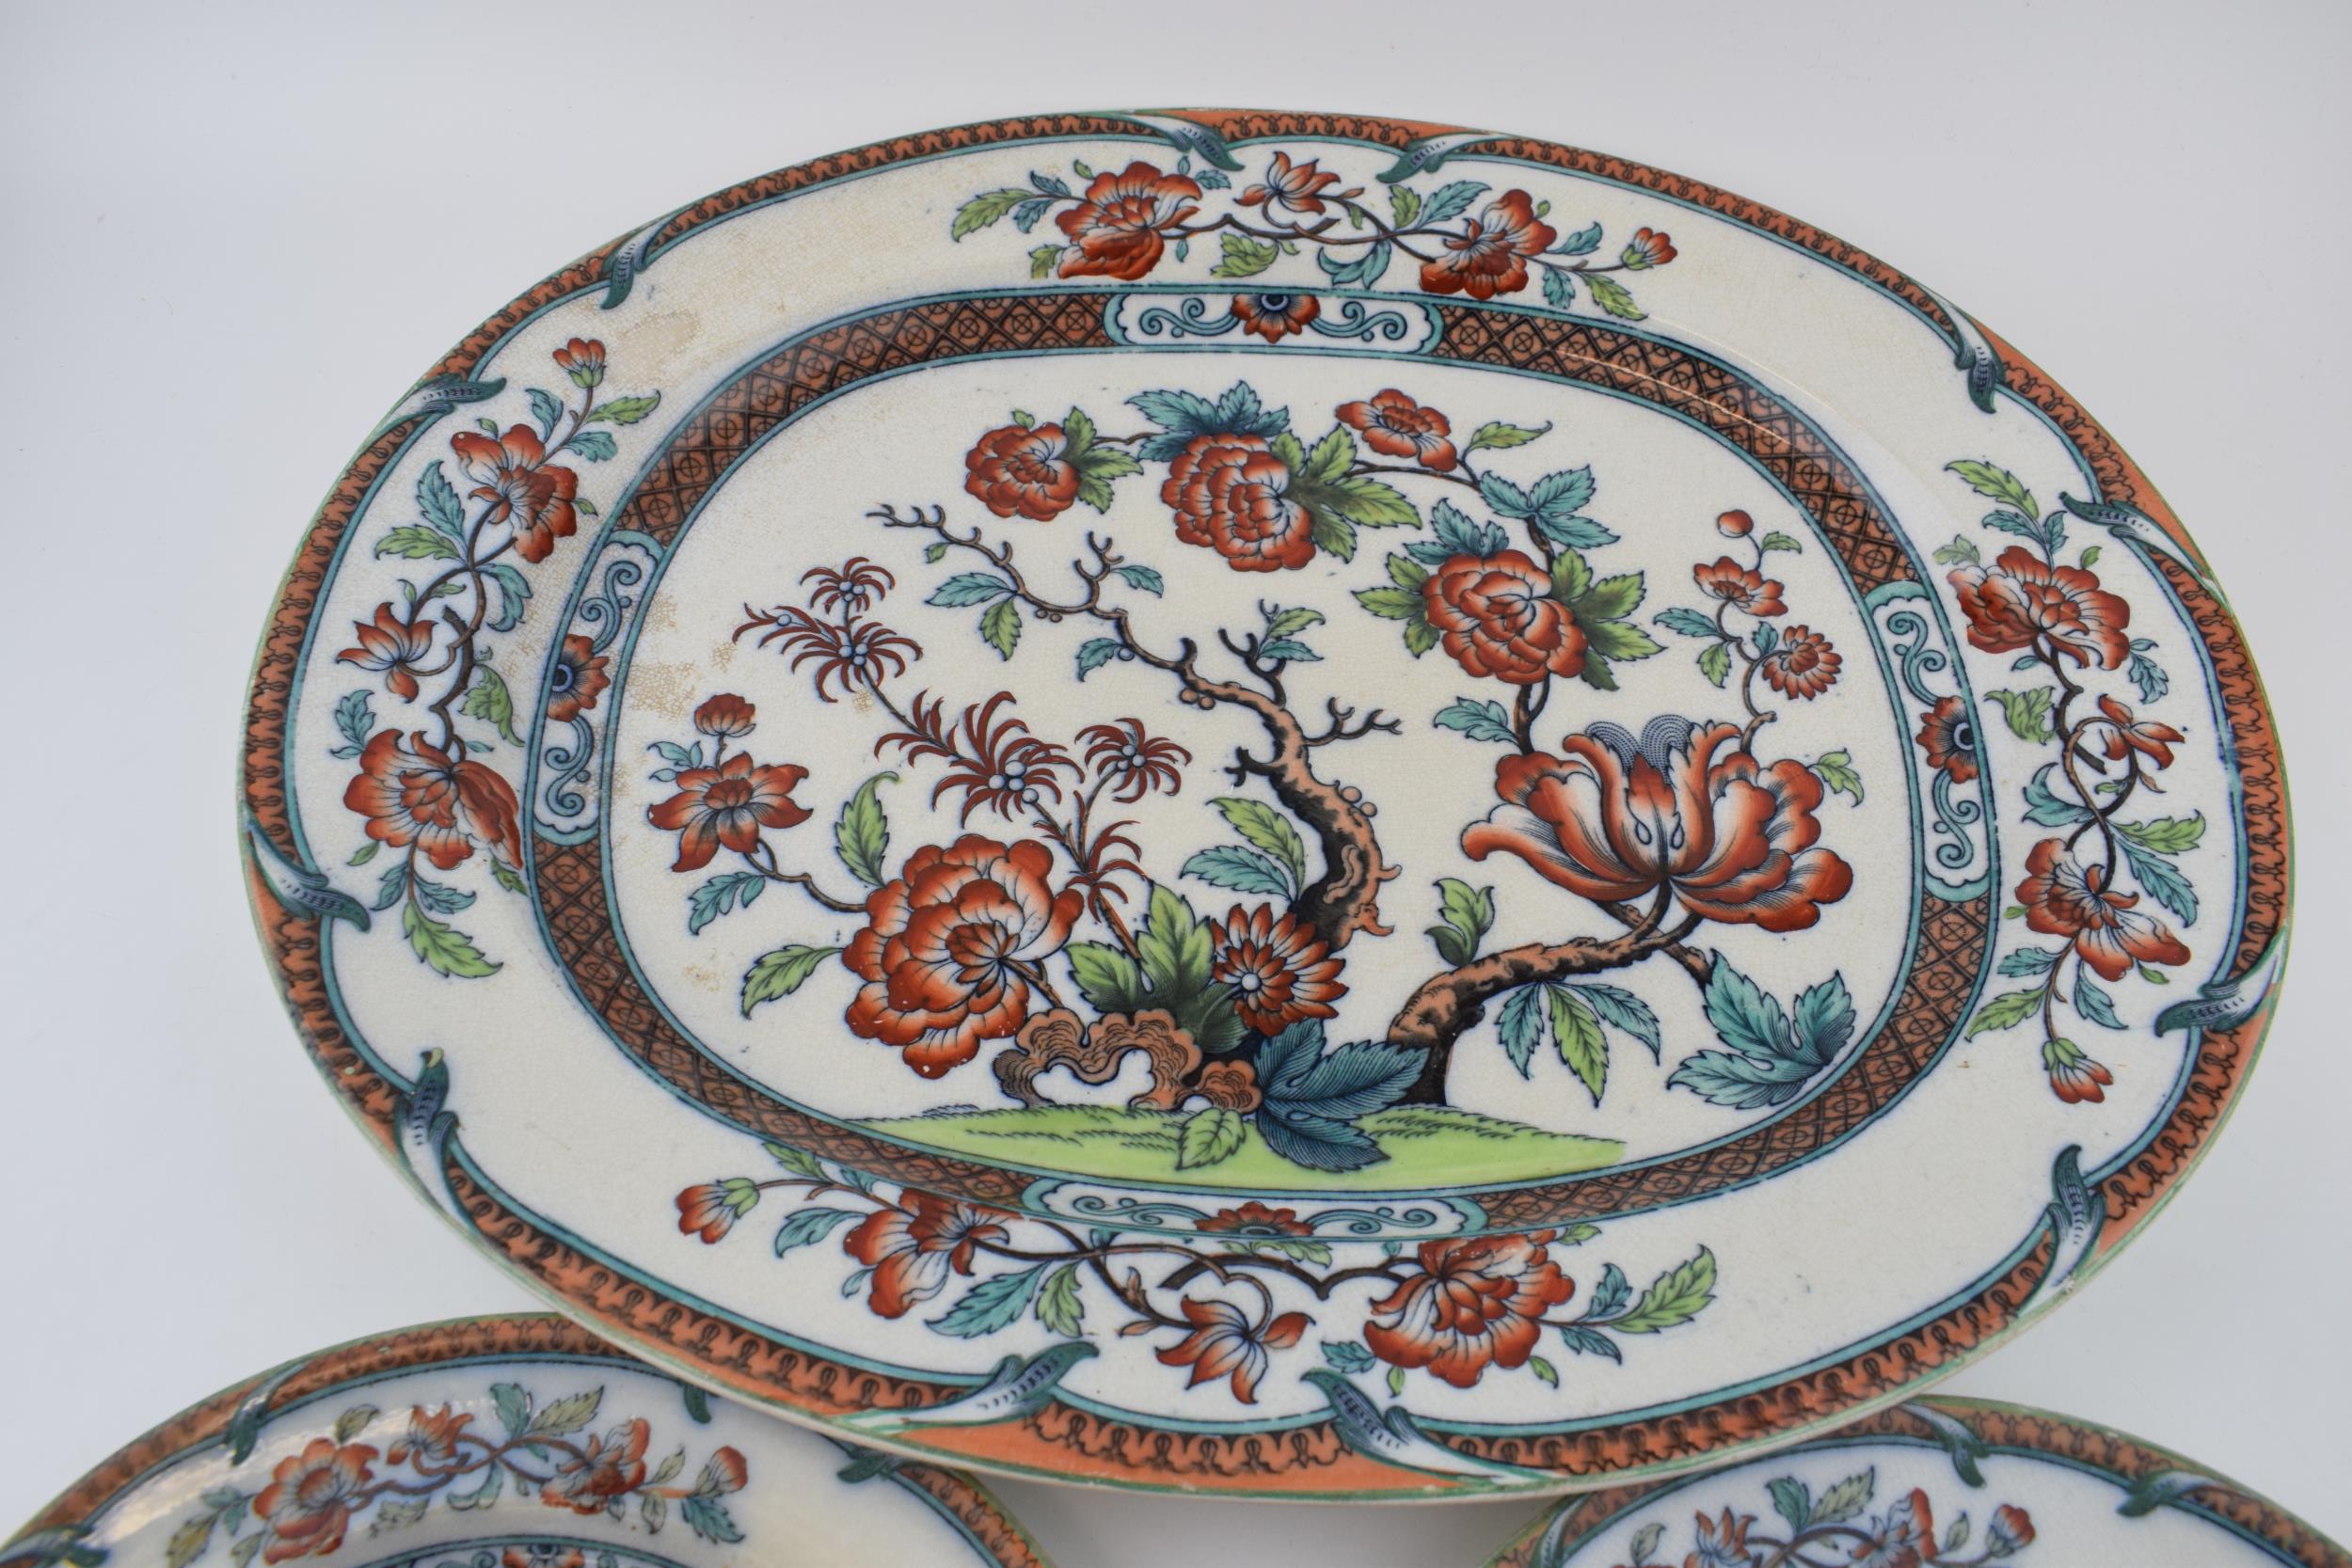 An early 19 th century transfer-printed and coloured iron stone china large floral design platter, - Image 4 of 5